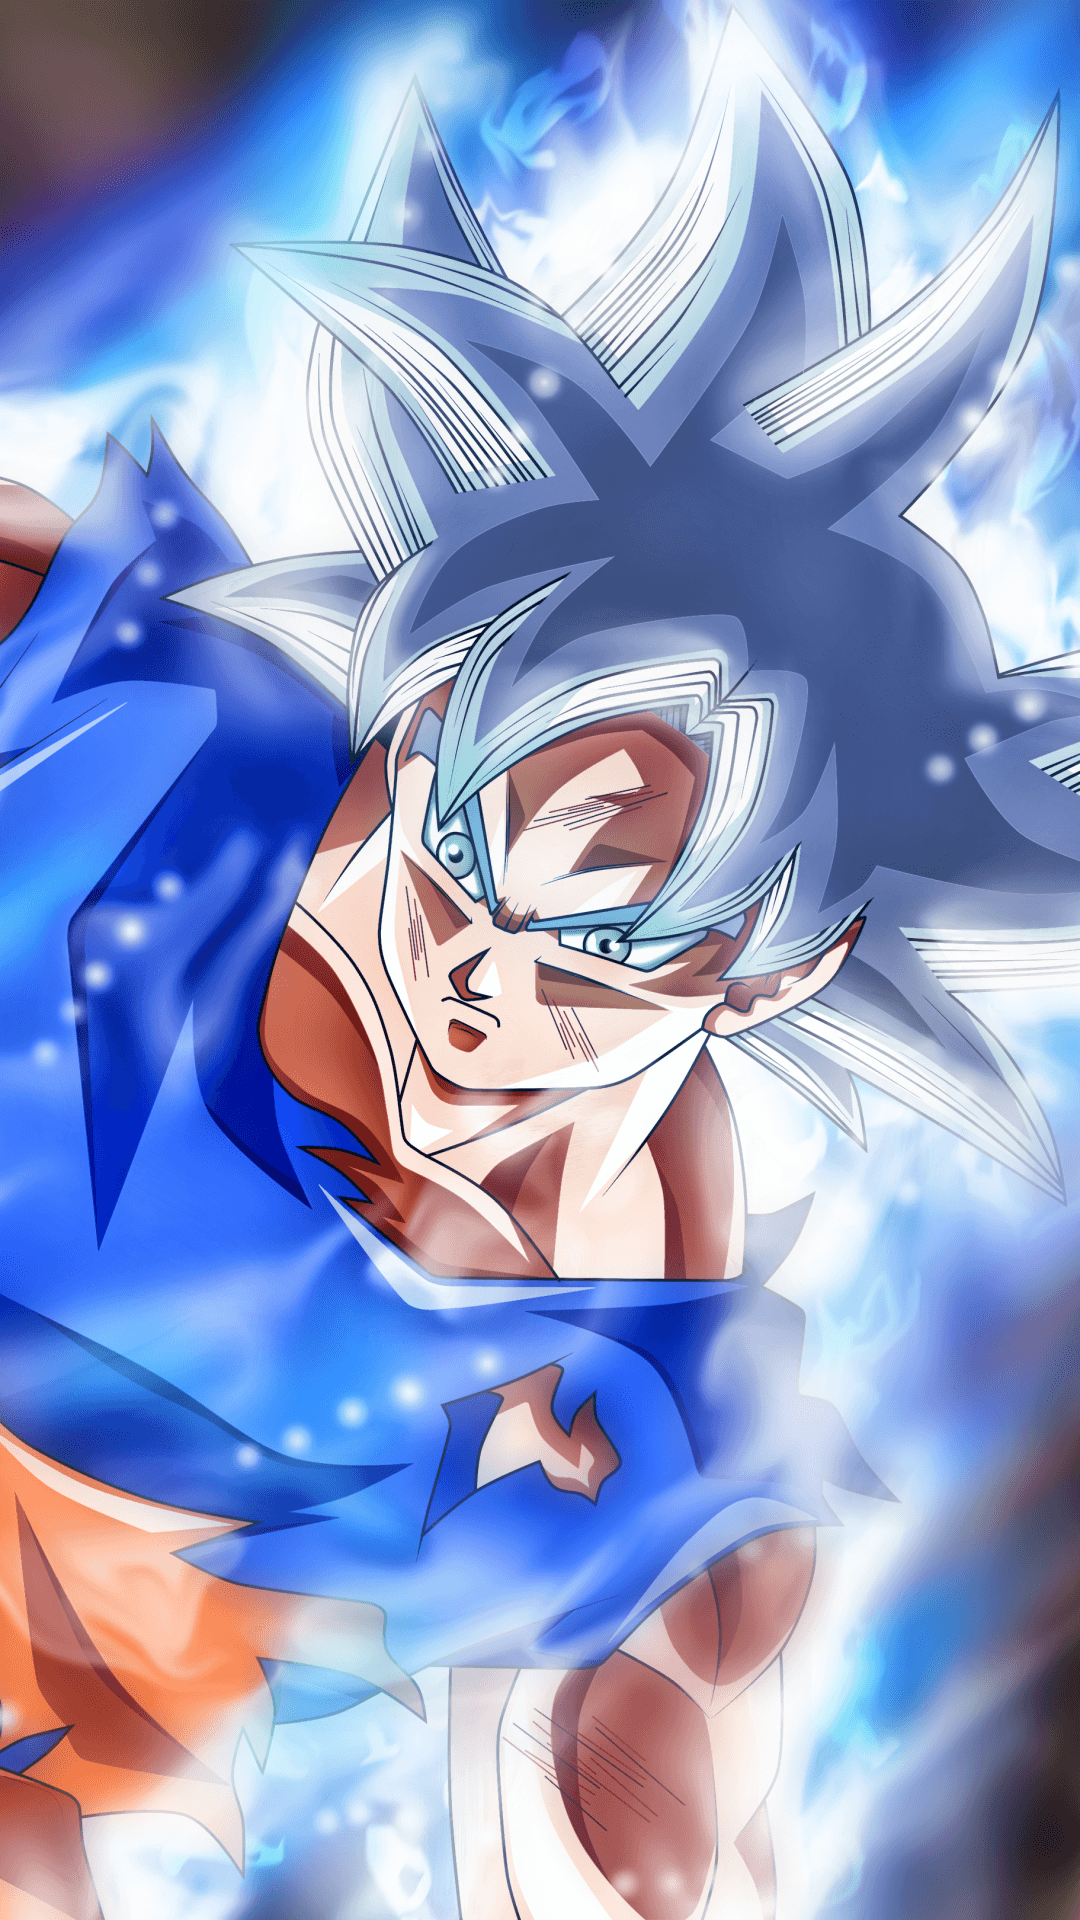 Download This Wallpaper Anime Dragon Ball Super (1080x1920) For All Your Phones And Tablets. Anime Dragon Ball Super, Dragon Ball Wallpaper, Anime Dragon Ball